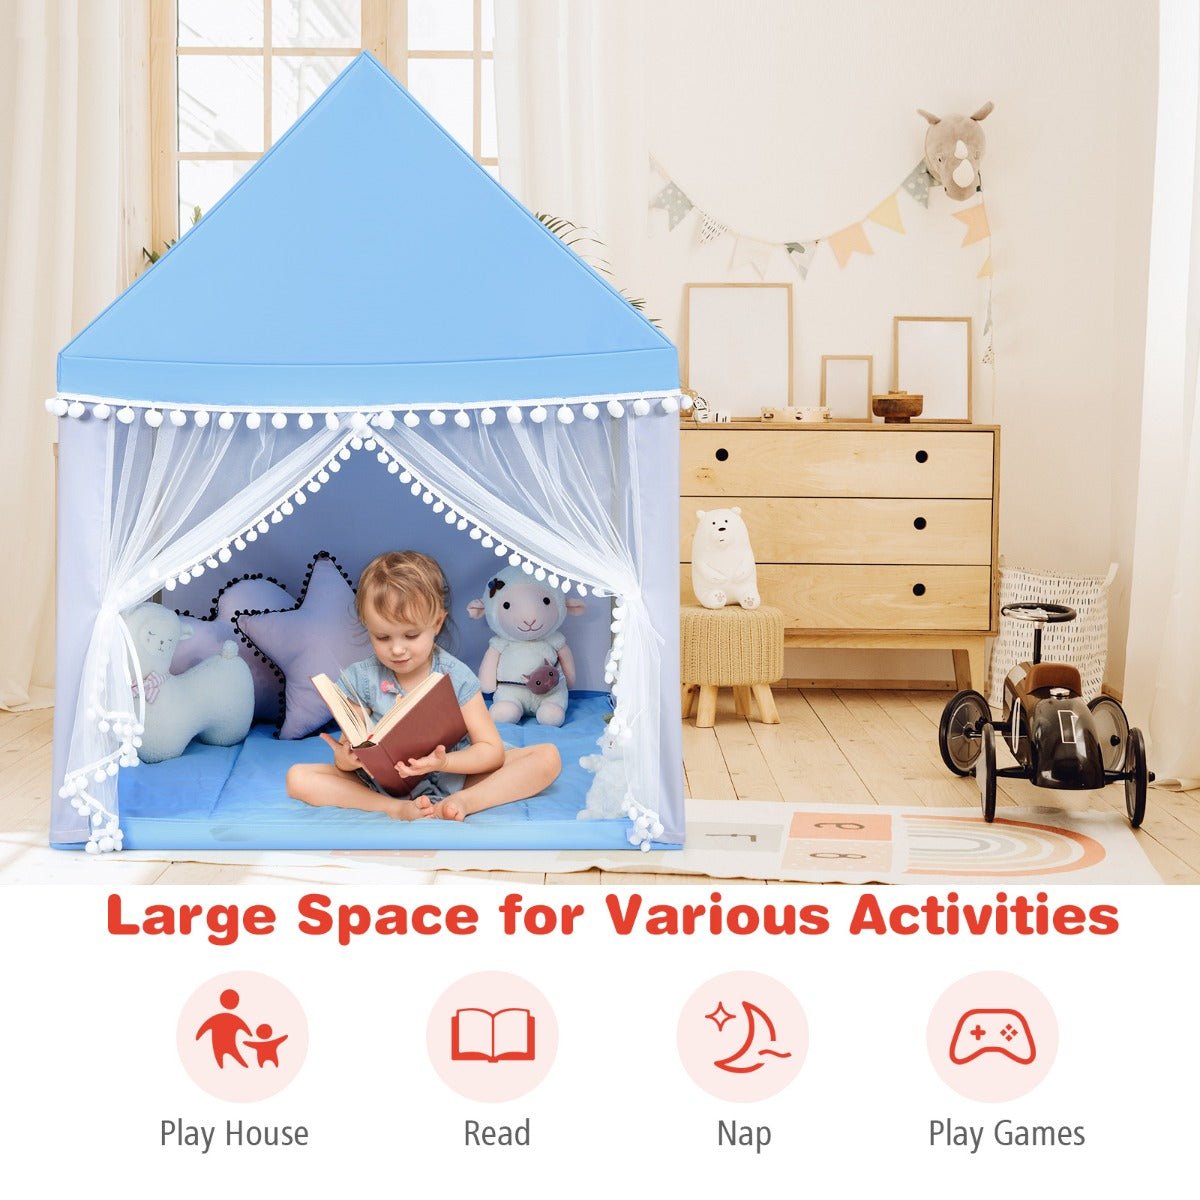 Imaginative Kids Play Space: Blue Castle Playhouse with Wood Frame & Mat